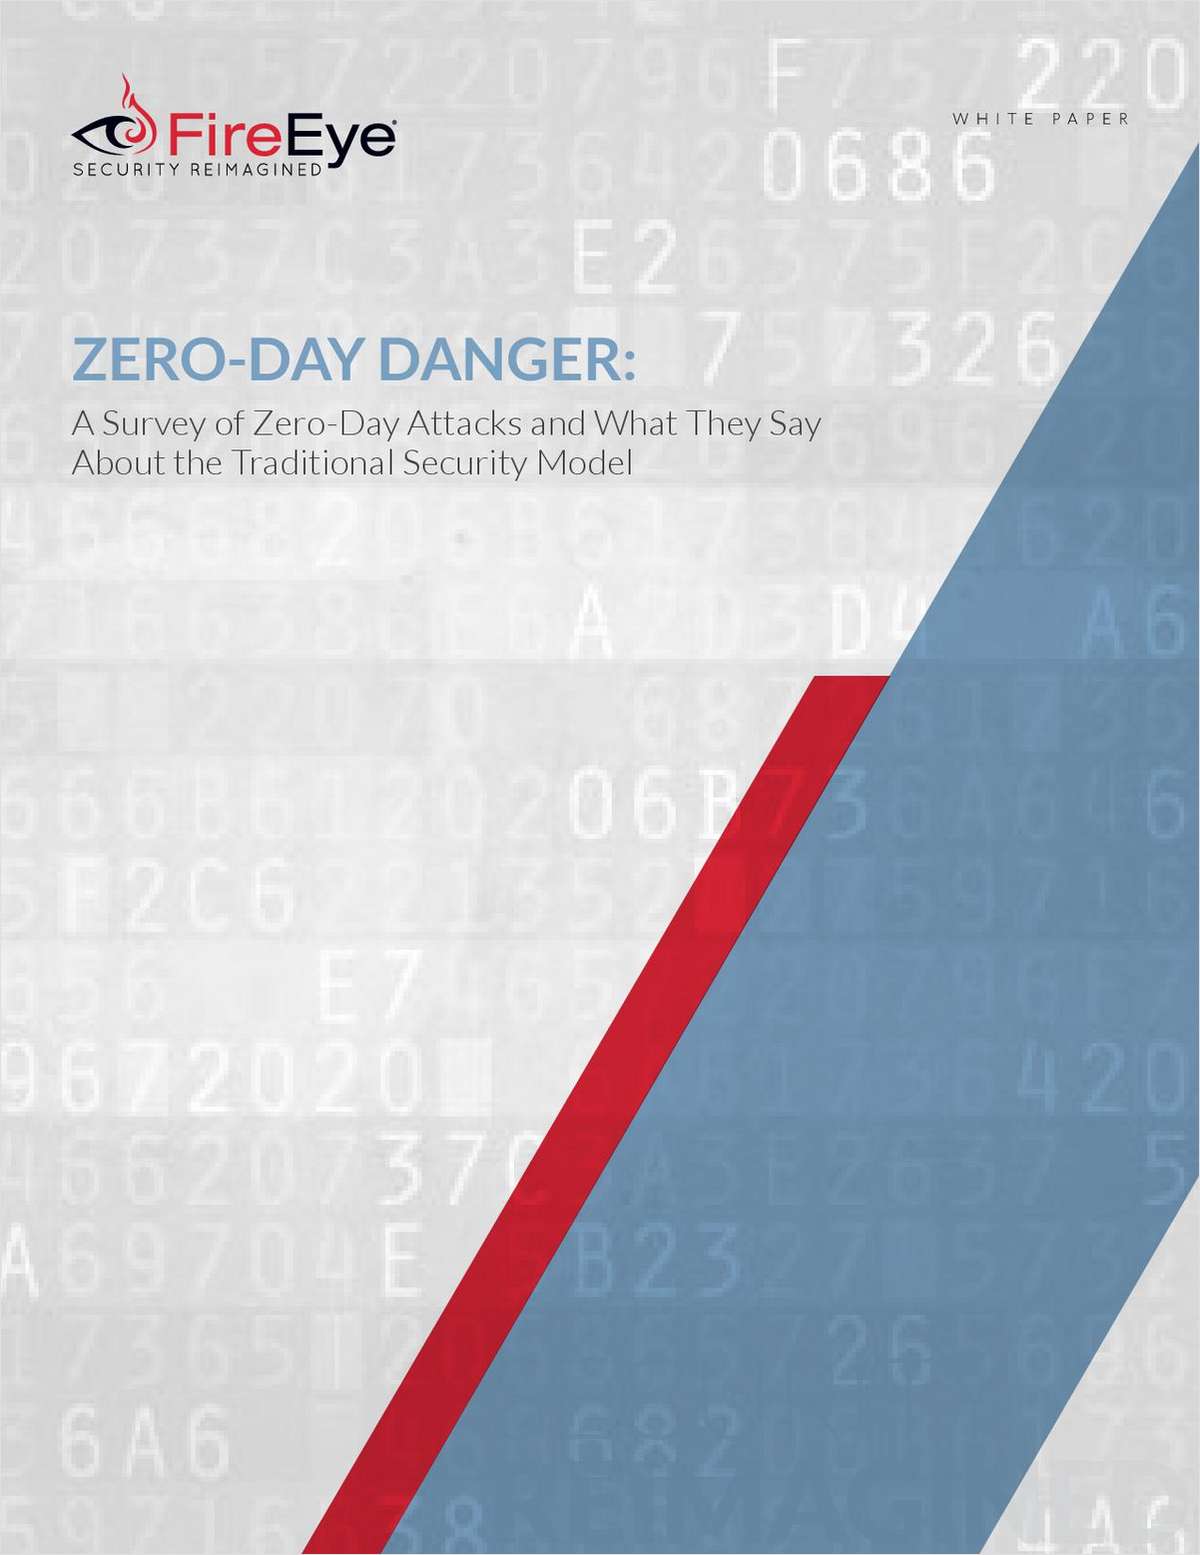 11 Practical Steps to Reduce the Risks of Zero-Day Attacks